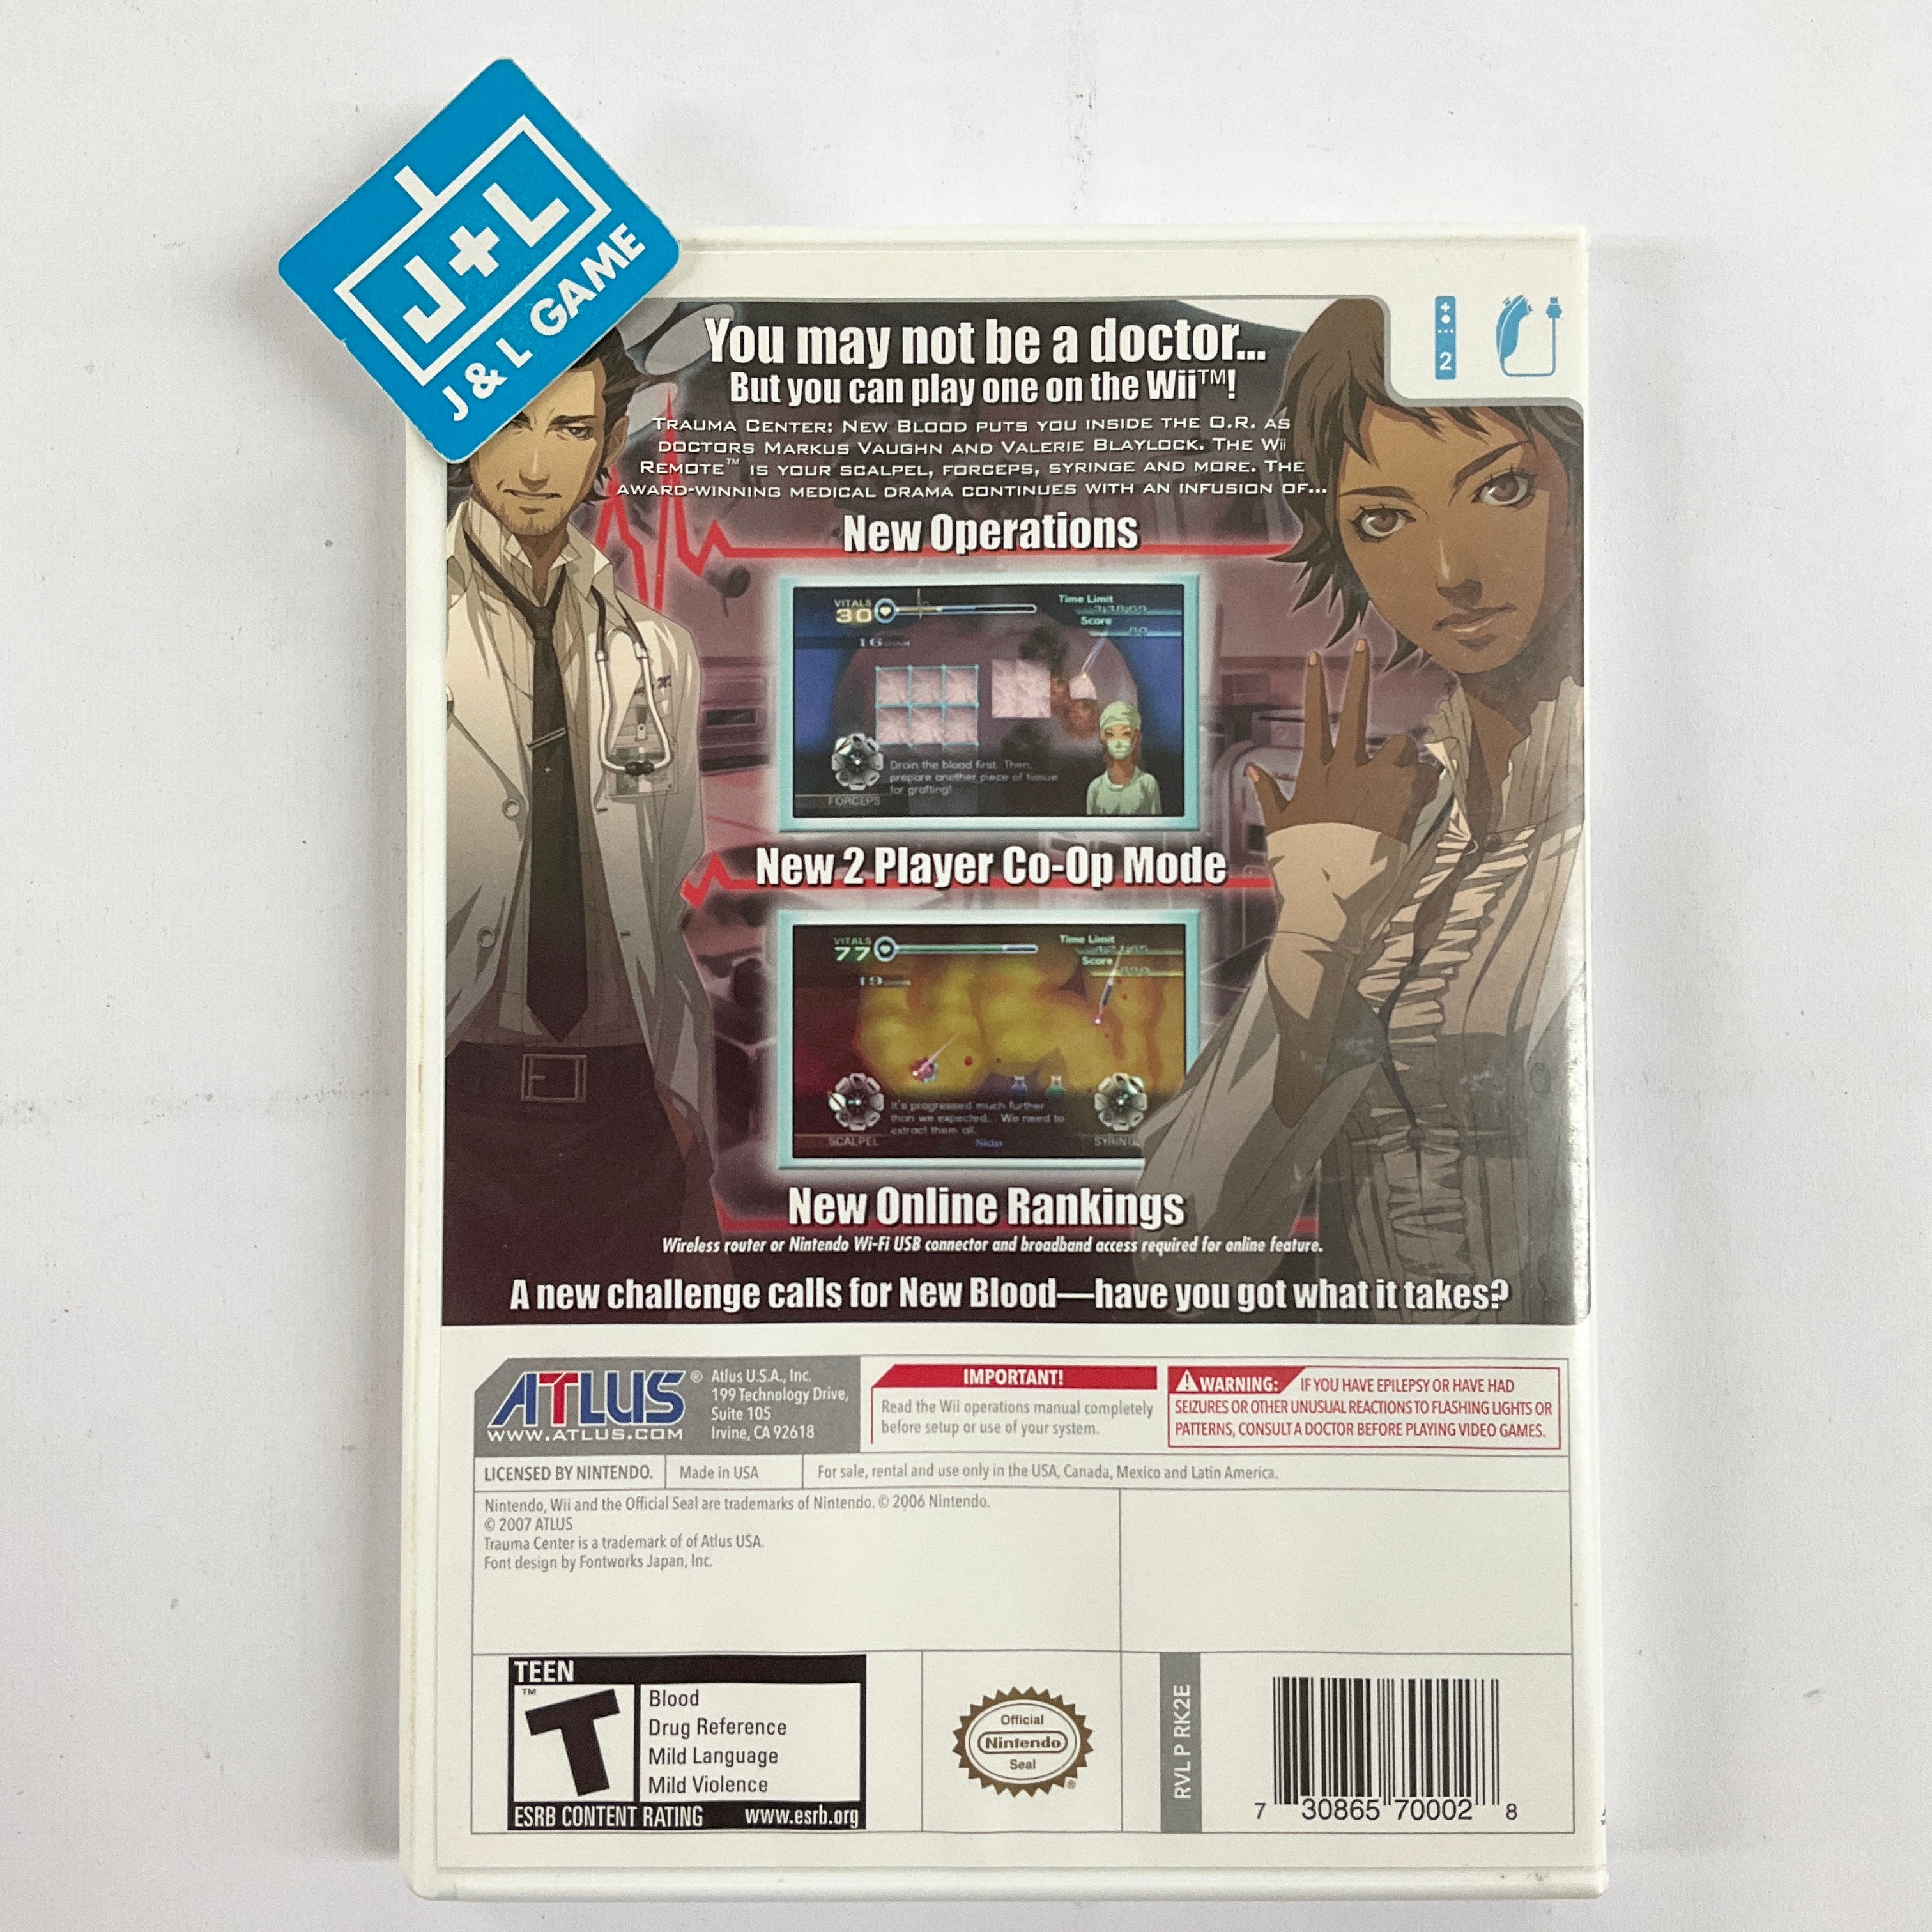 Trauma Center: New Blood - Nintendo Wii [Pre-Owned] Video Games Atlus   